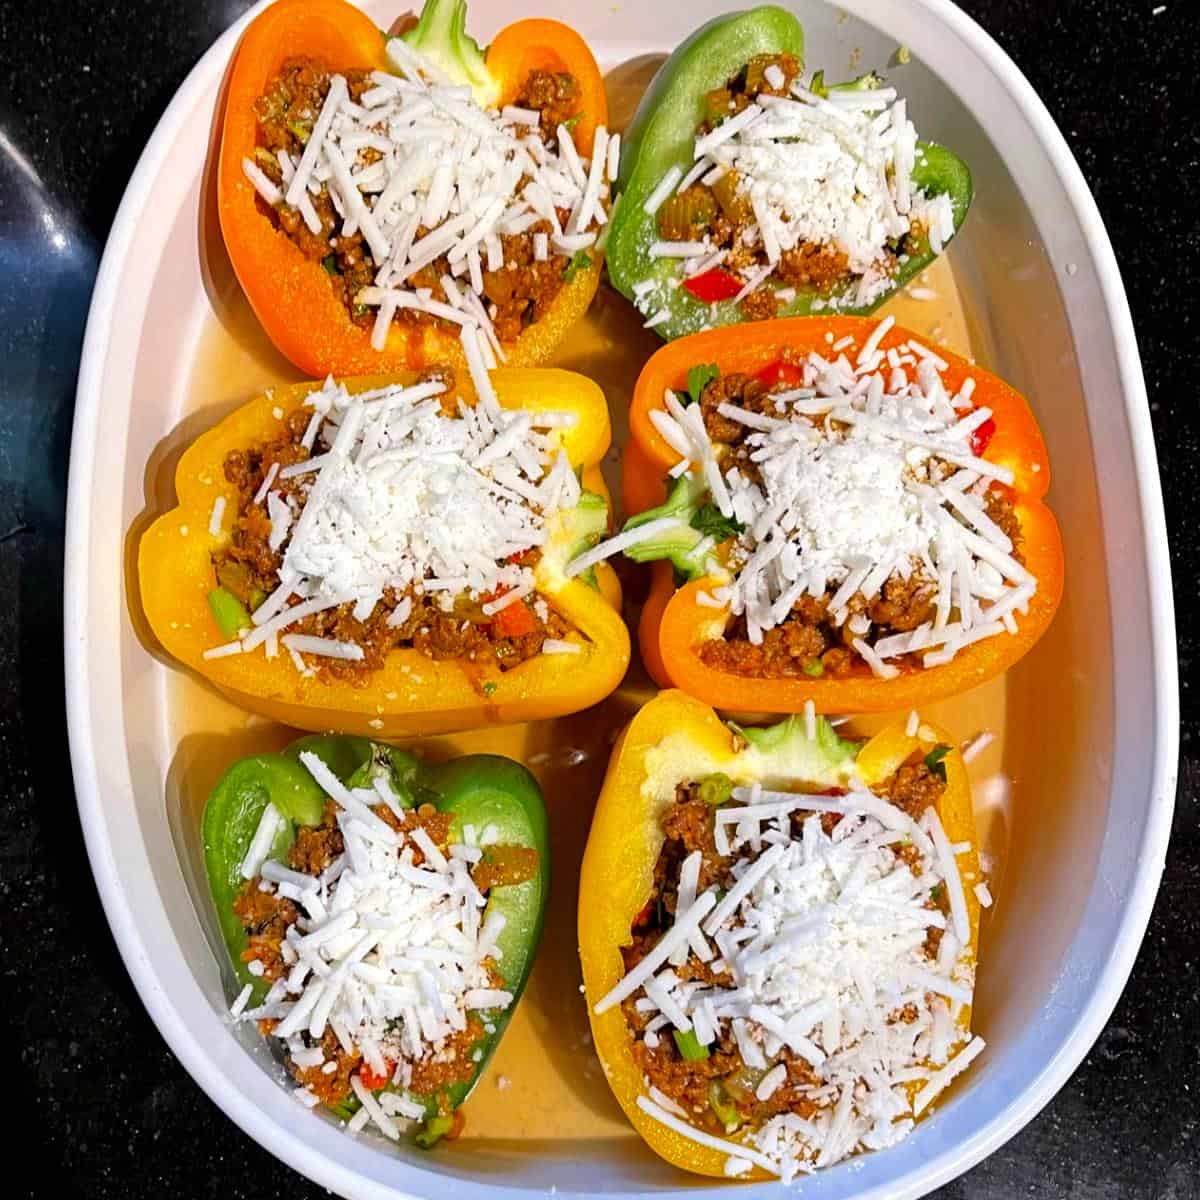 Bell peppers stuffed with vegan meat and vegan cheese filling.